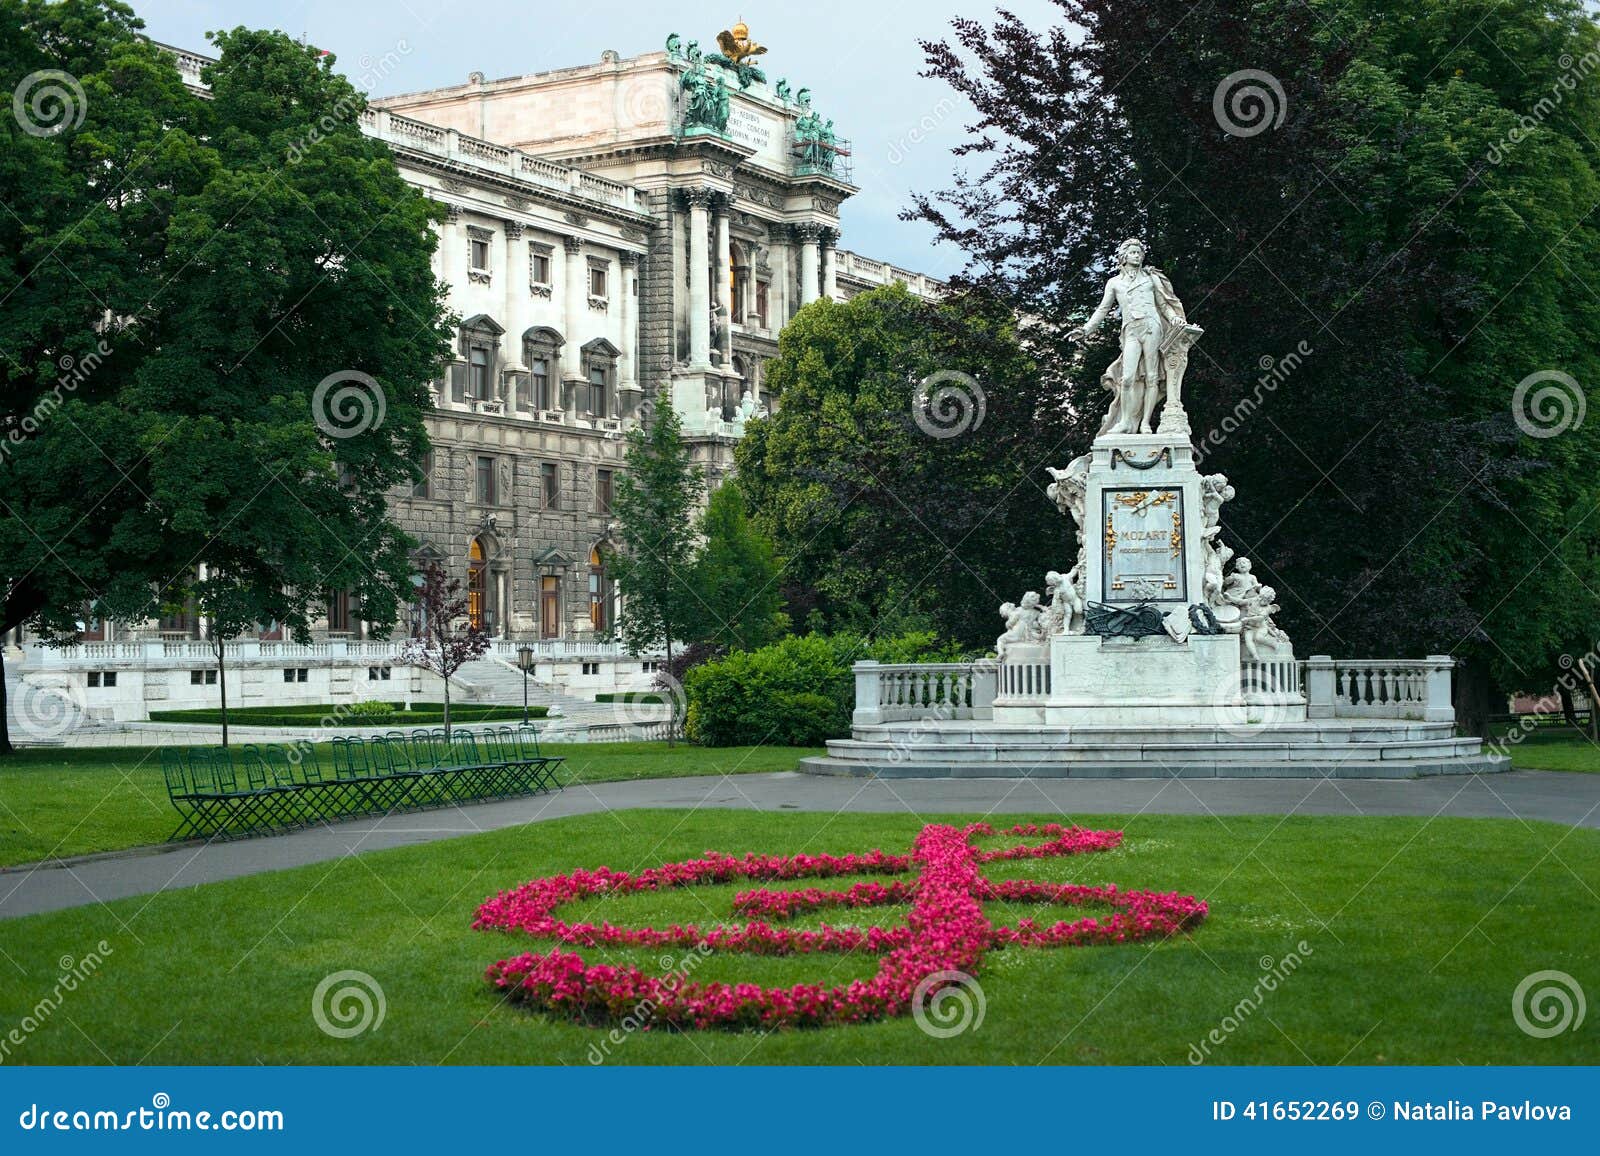 statue of mozart and hofburg palace